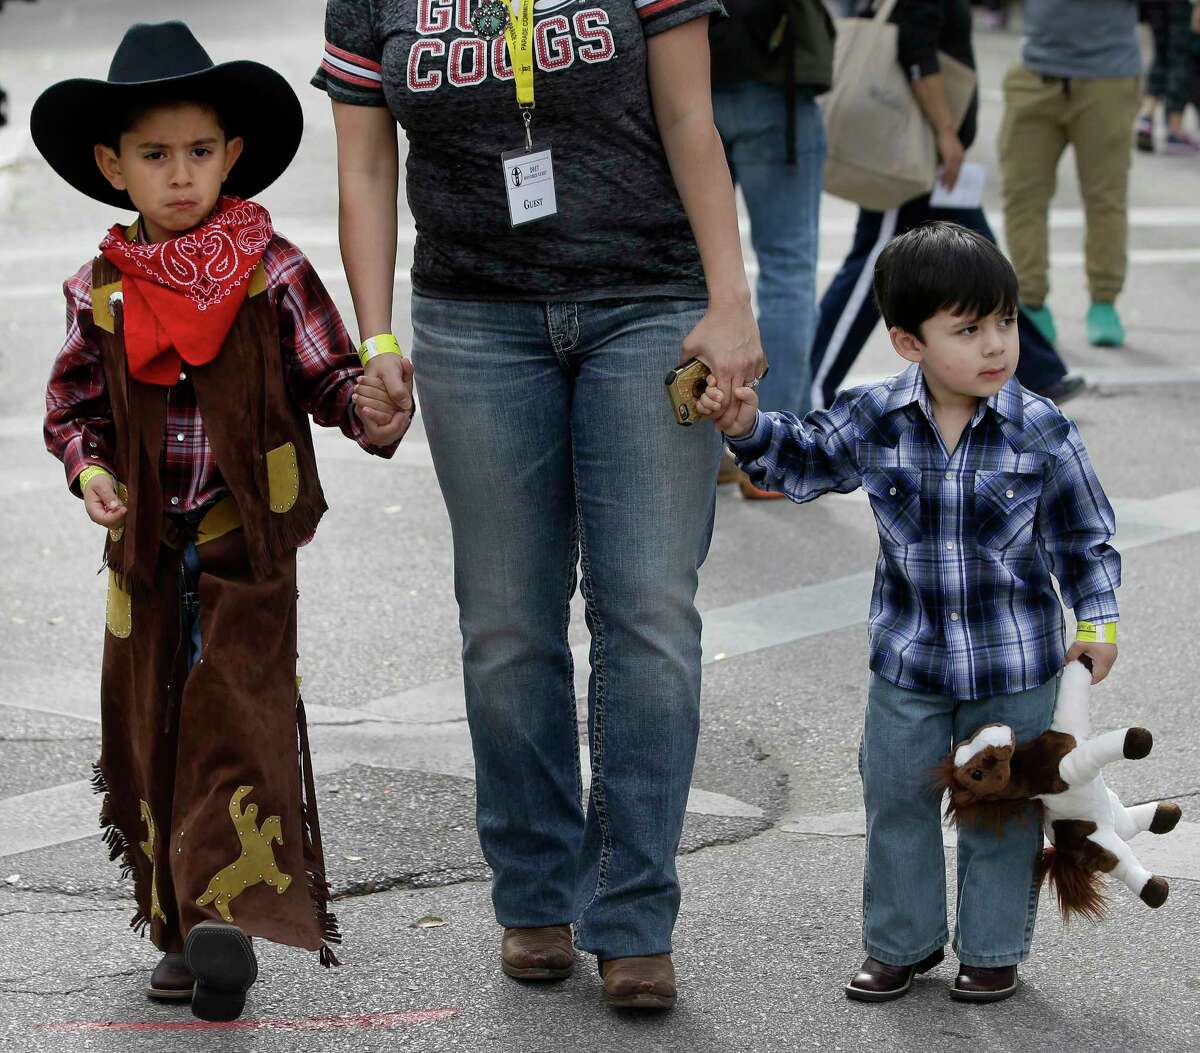 Brothers Armando Walle, left, 6 and Joaquin Walle, 3, walk with their mother, Debbie Walle, at the Houston Livestock Show and Rodeo Downtown Rodeo Parade Saturday, March 4, 2017, in Houston.